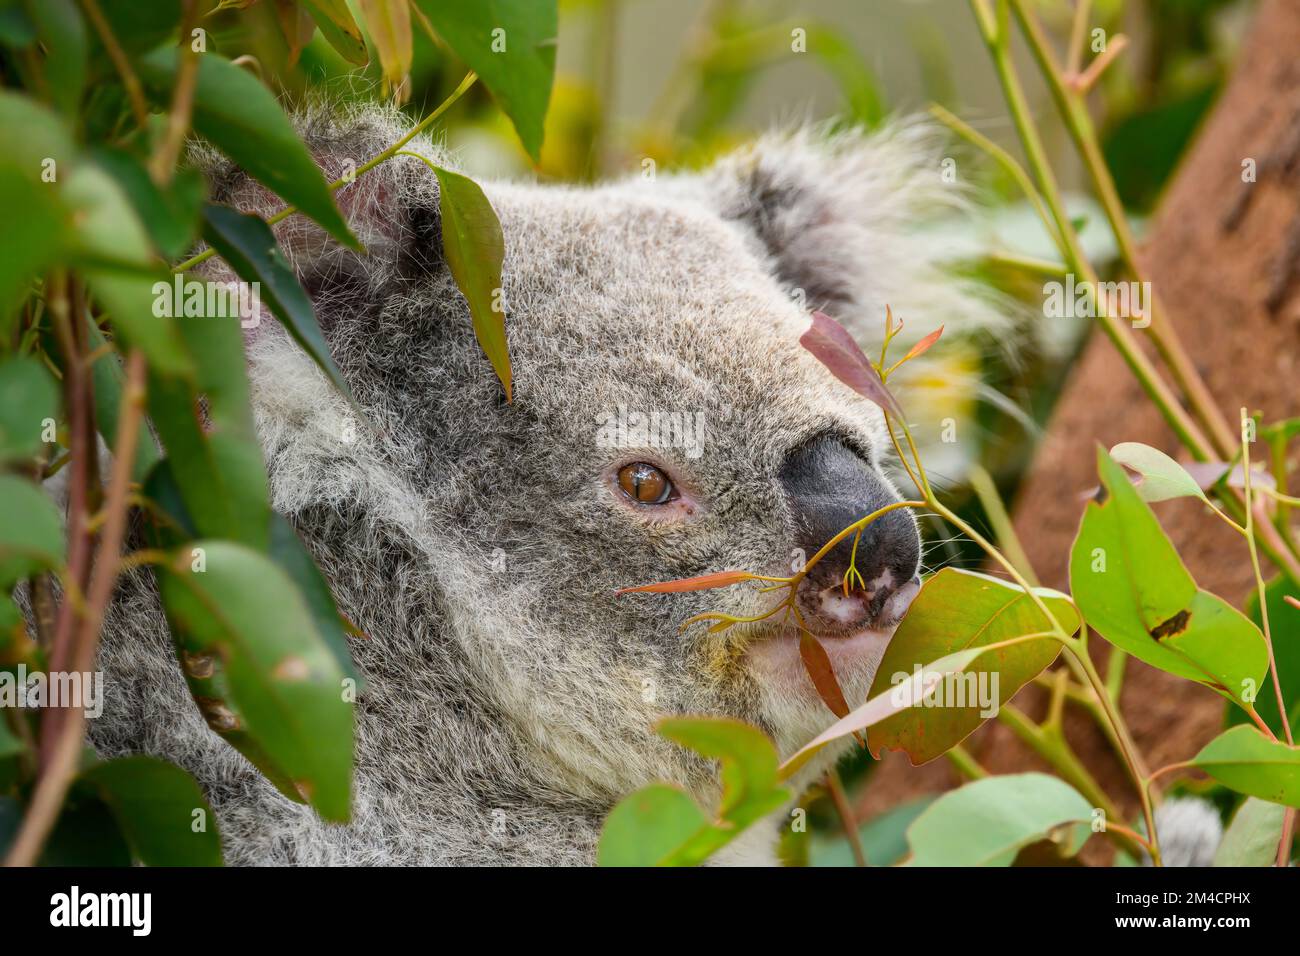 Koala in Sydney, Australia looks out from a section of dense bushland. Stock Photo